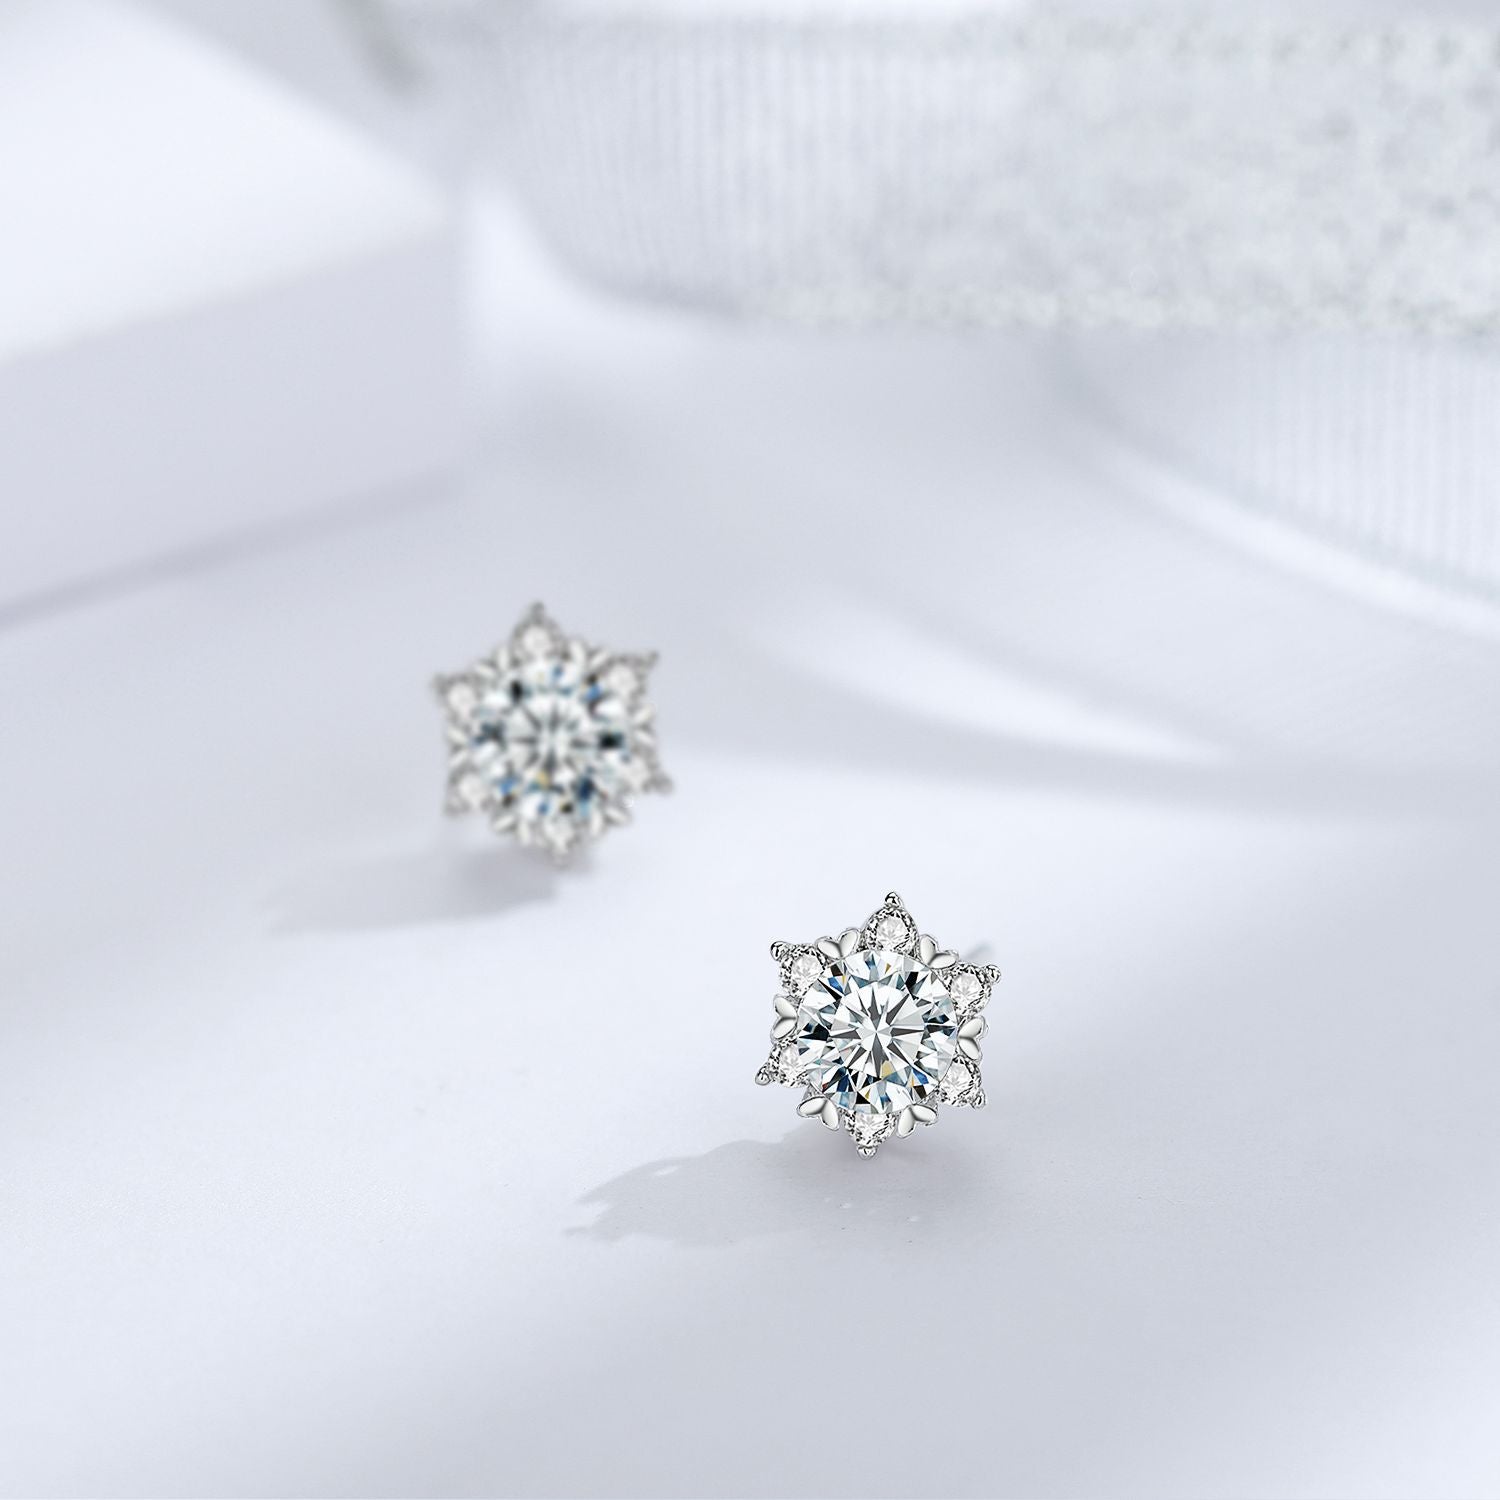 Gemstonely-Classic Snowflake Earrings for Women with 925 Sterling Silver and 0.5 Carat Simulated Diamond